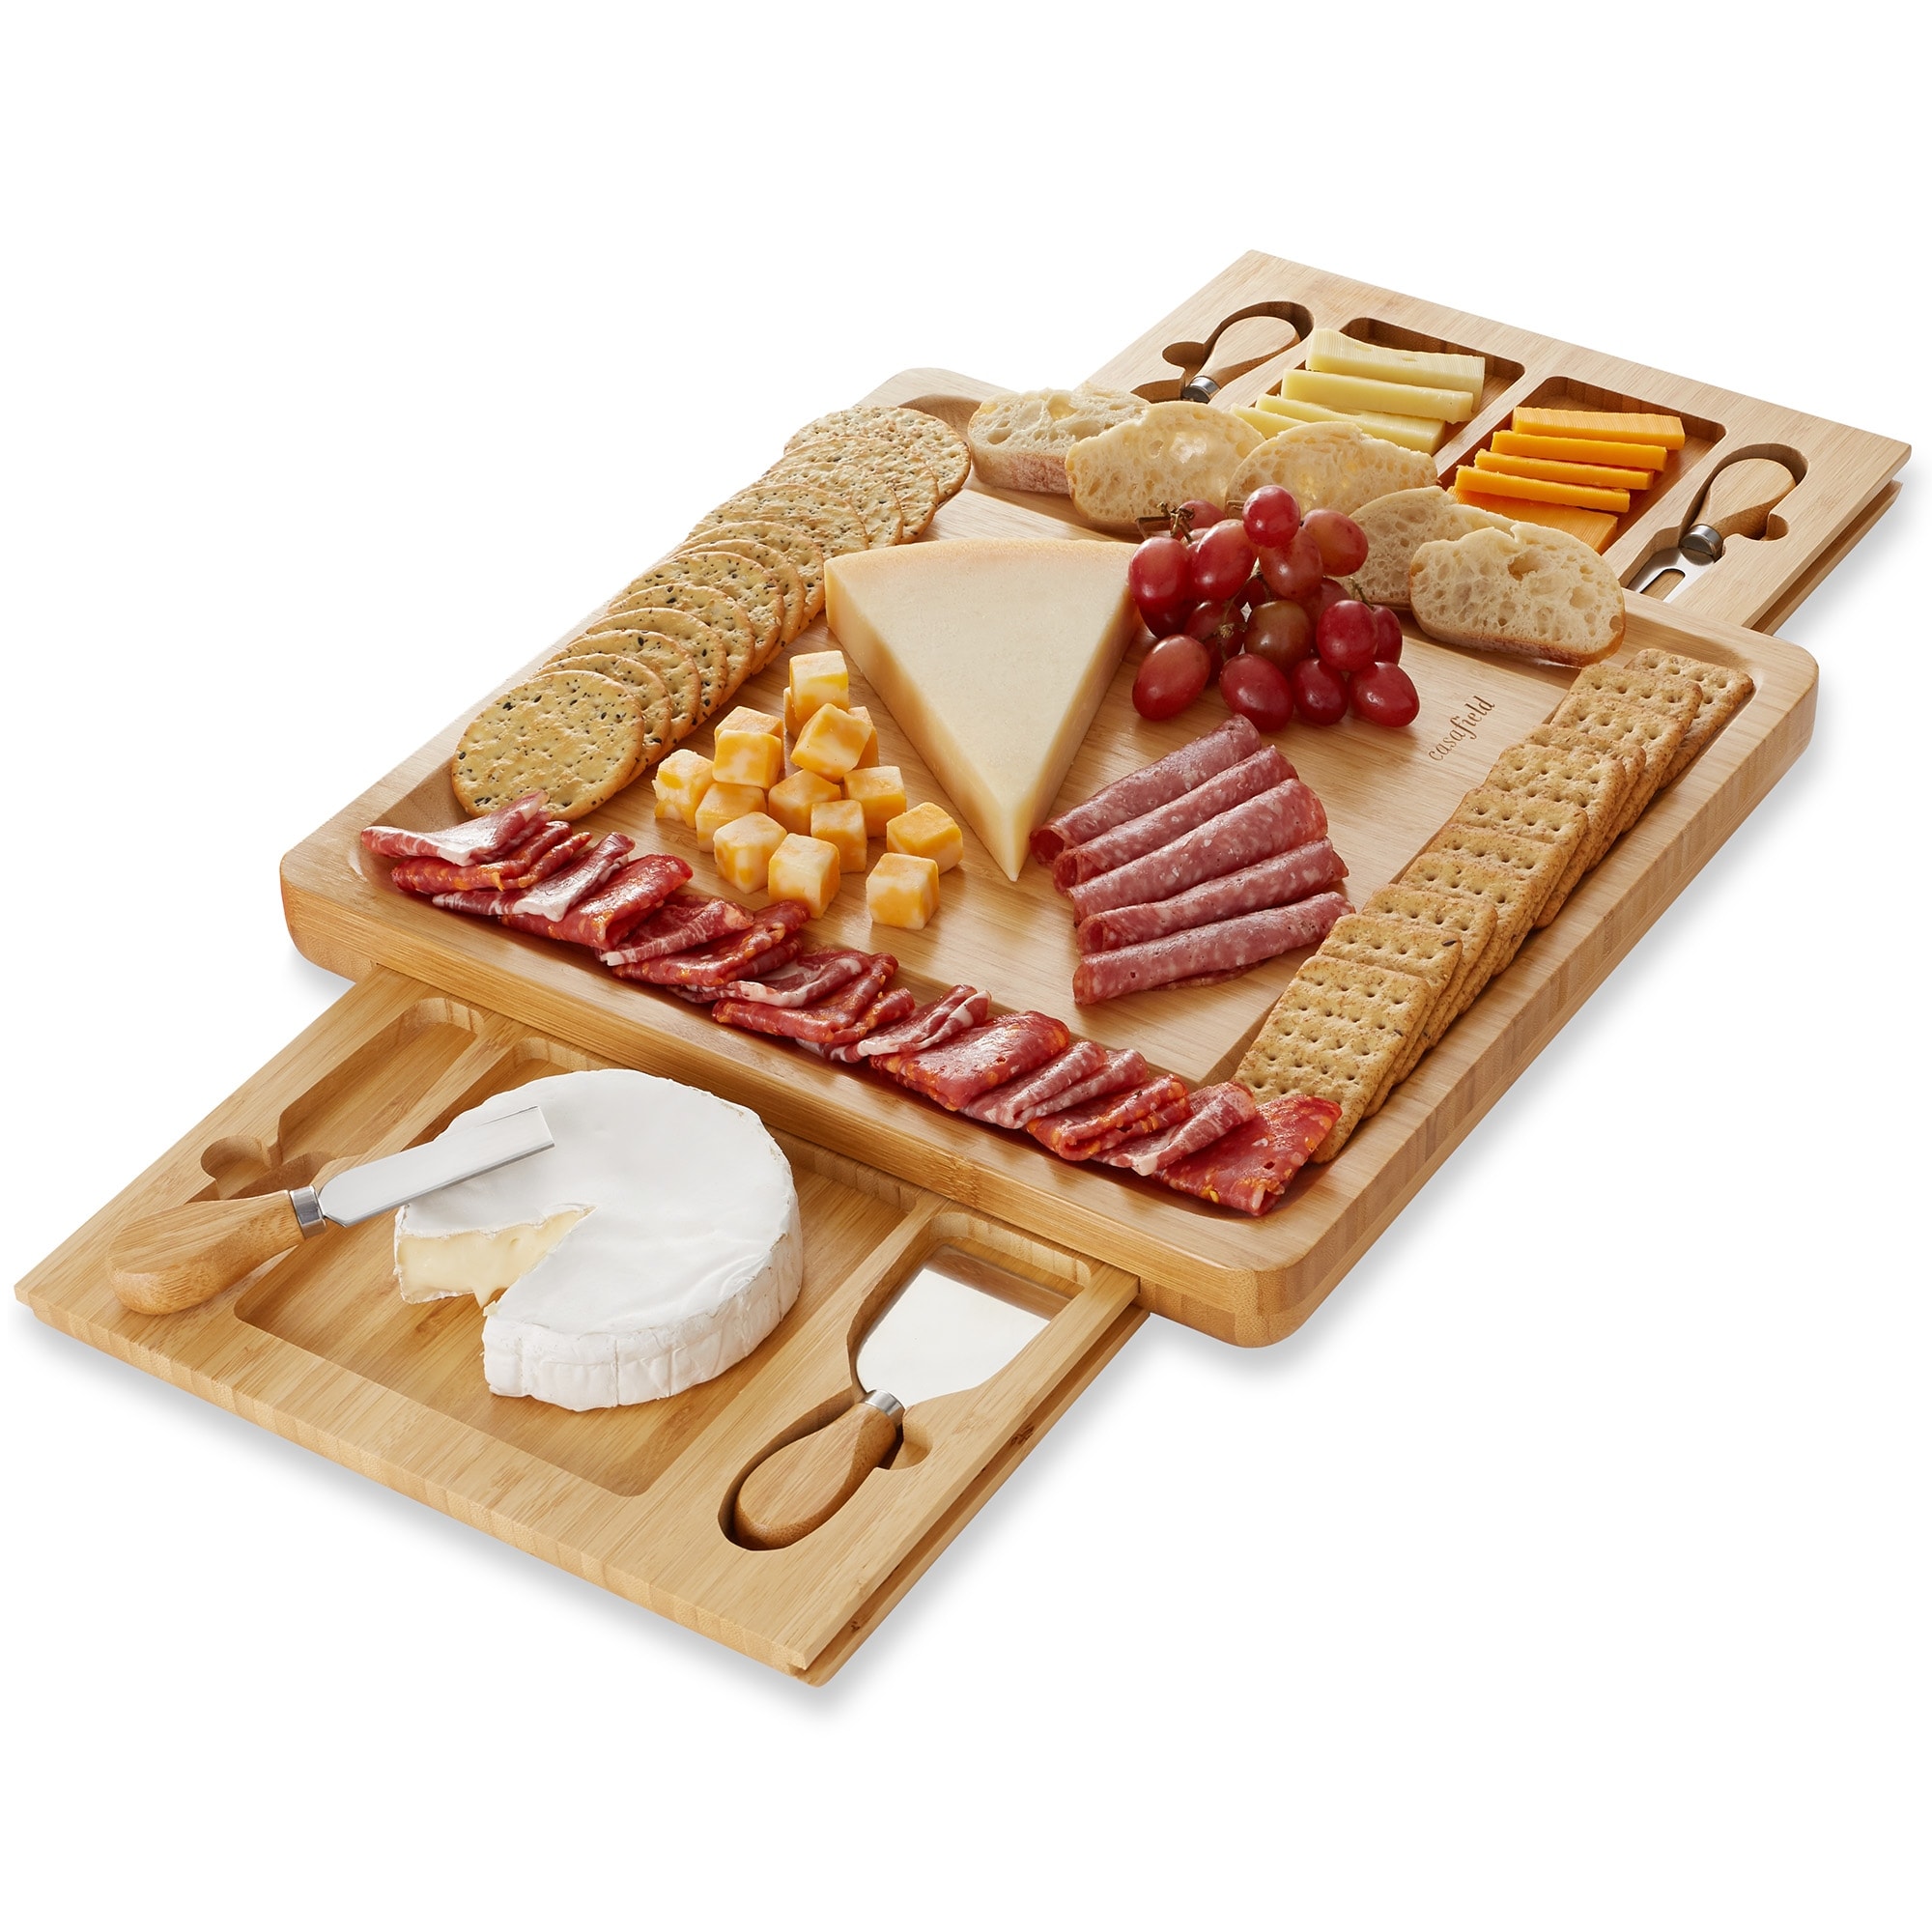 https://ak1.ostkcdn.com/images/products/is/images/direct/aaa4de29058c7a118e12132083f46de1205e4bb0/Bamboo-Cheese-Board-Gift-Set-with-2-Trays-and-4-Knives-by-Casafield.jpg